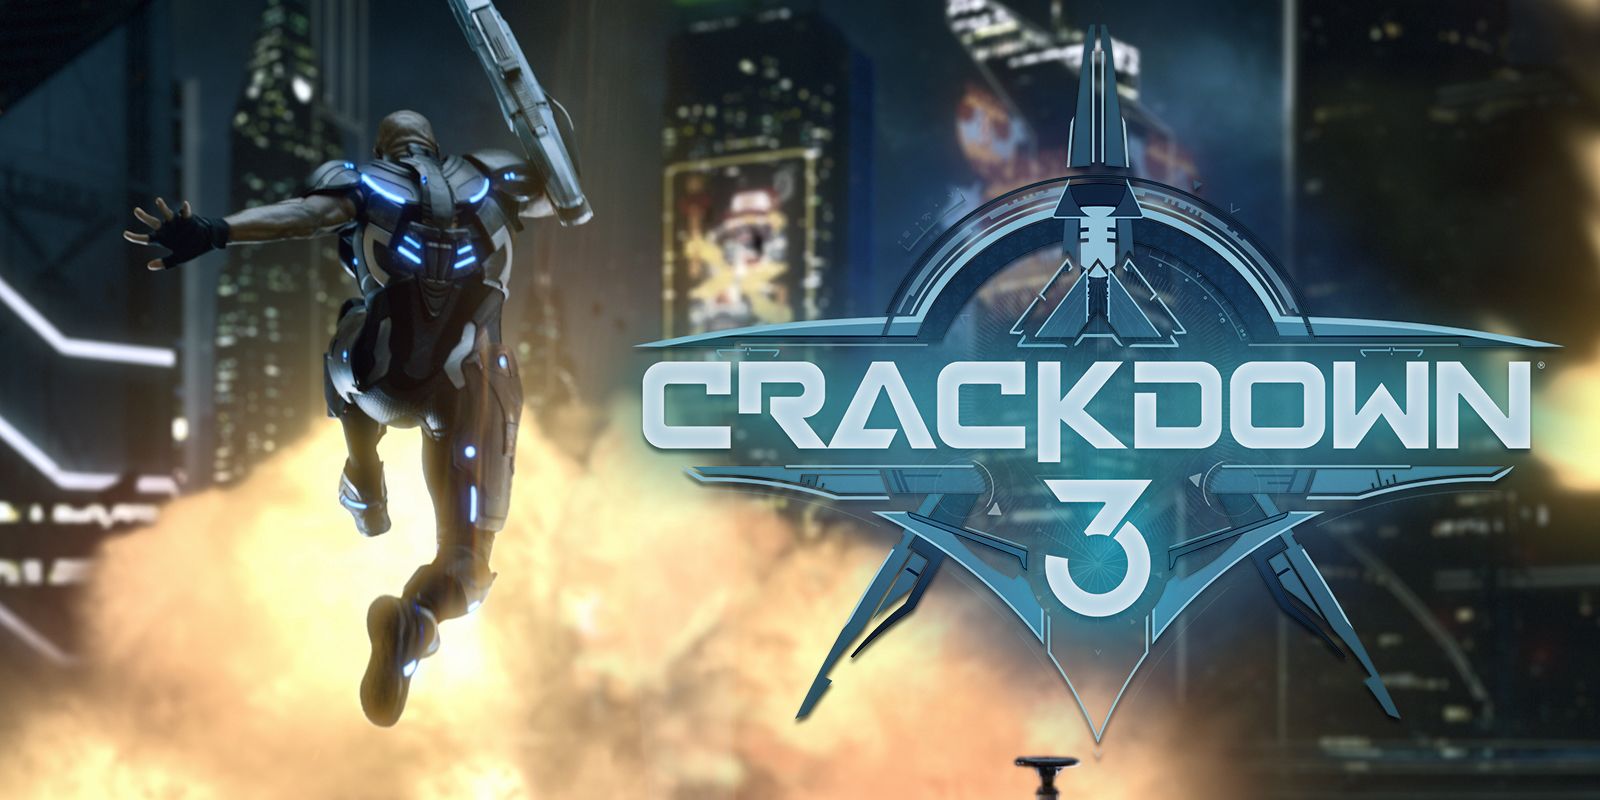 when will crackdown 3 be released